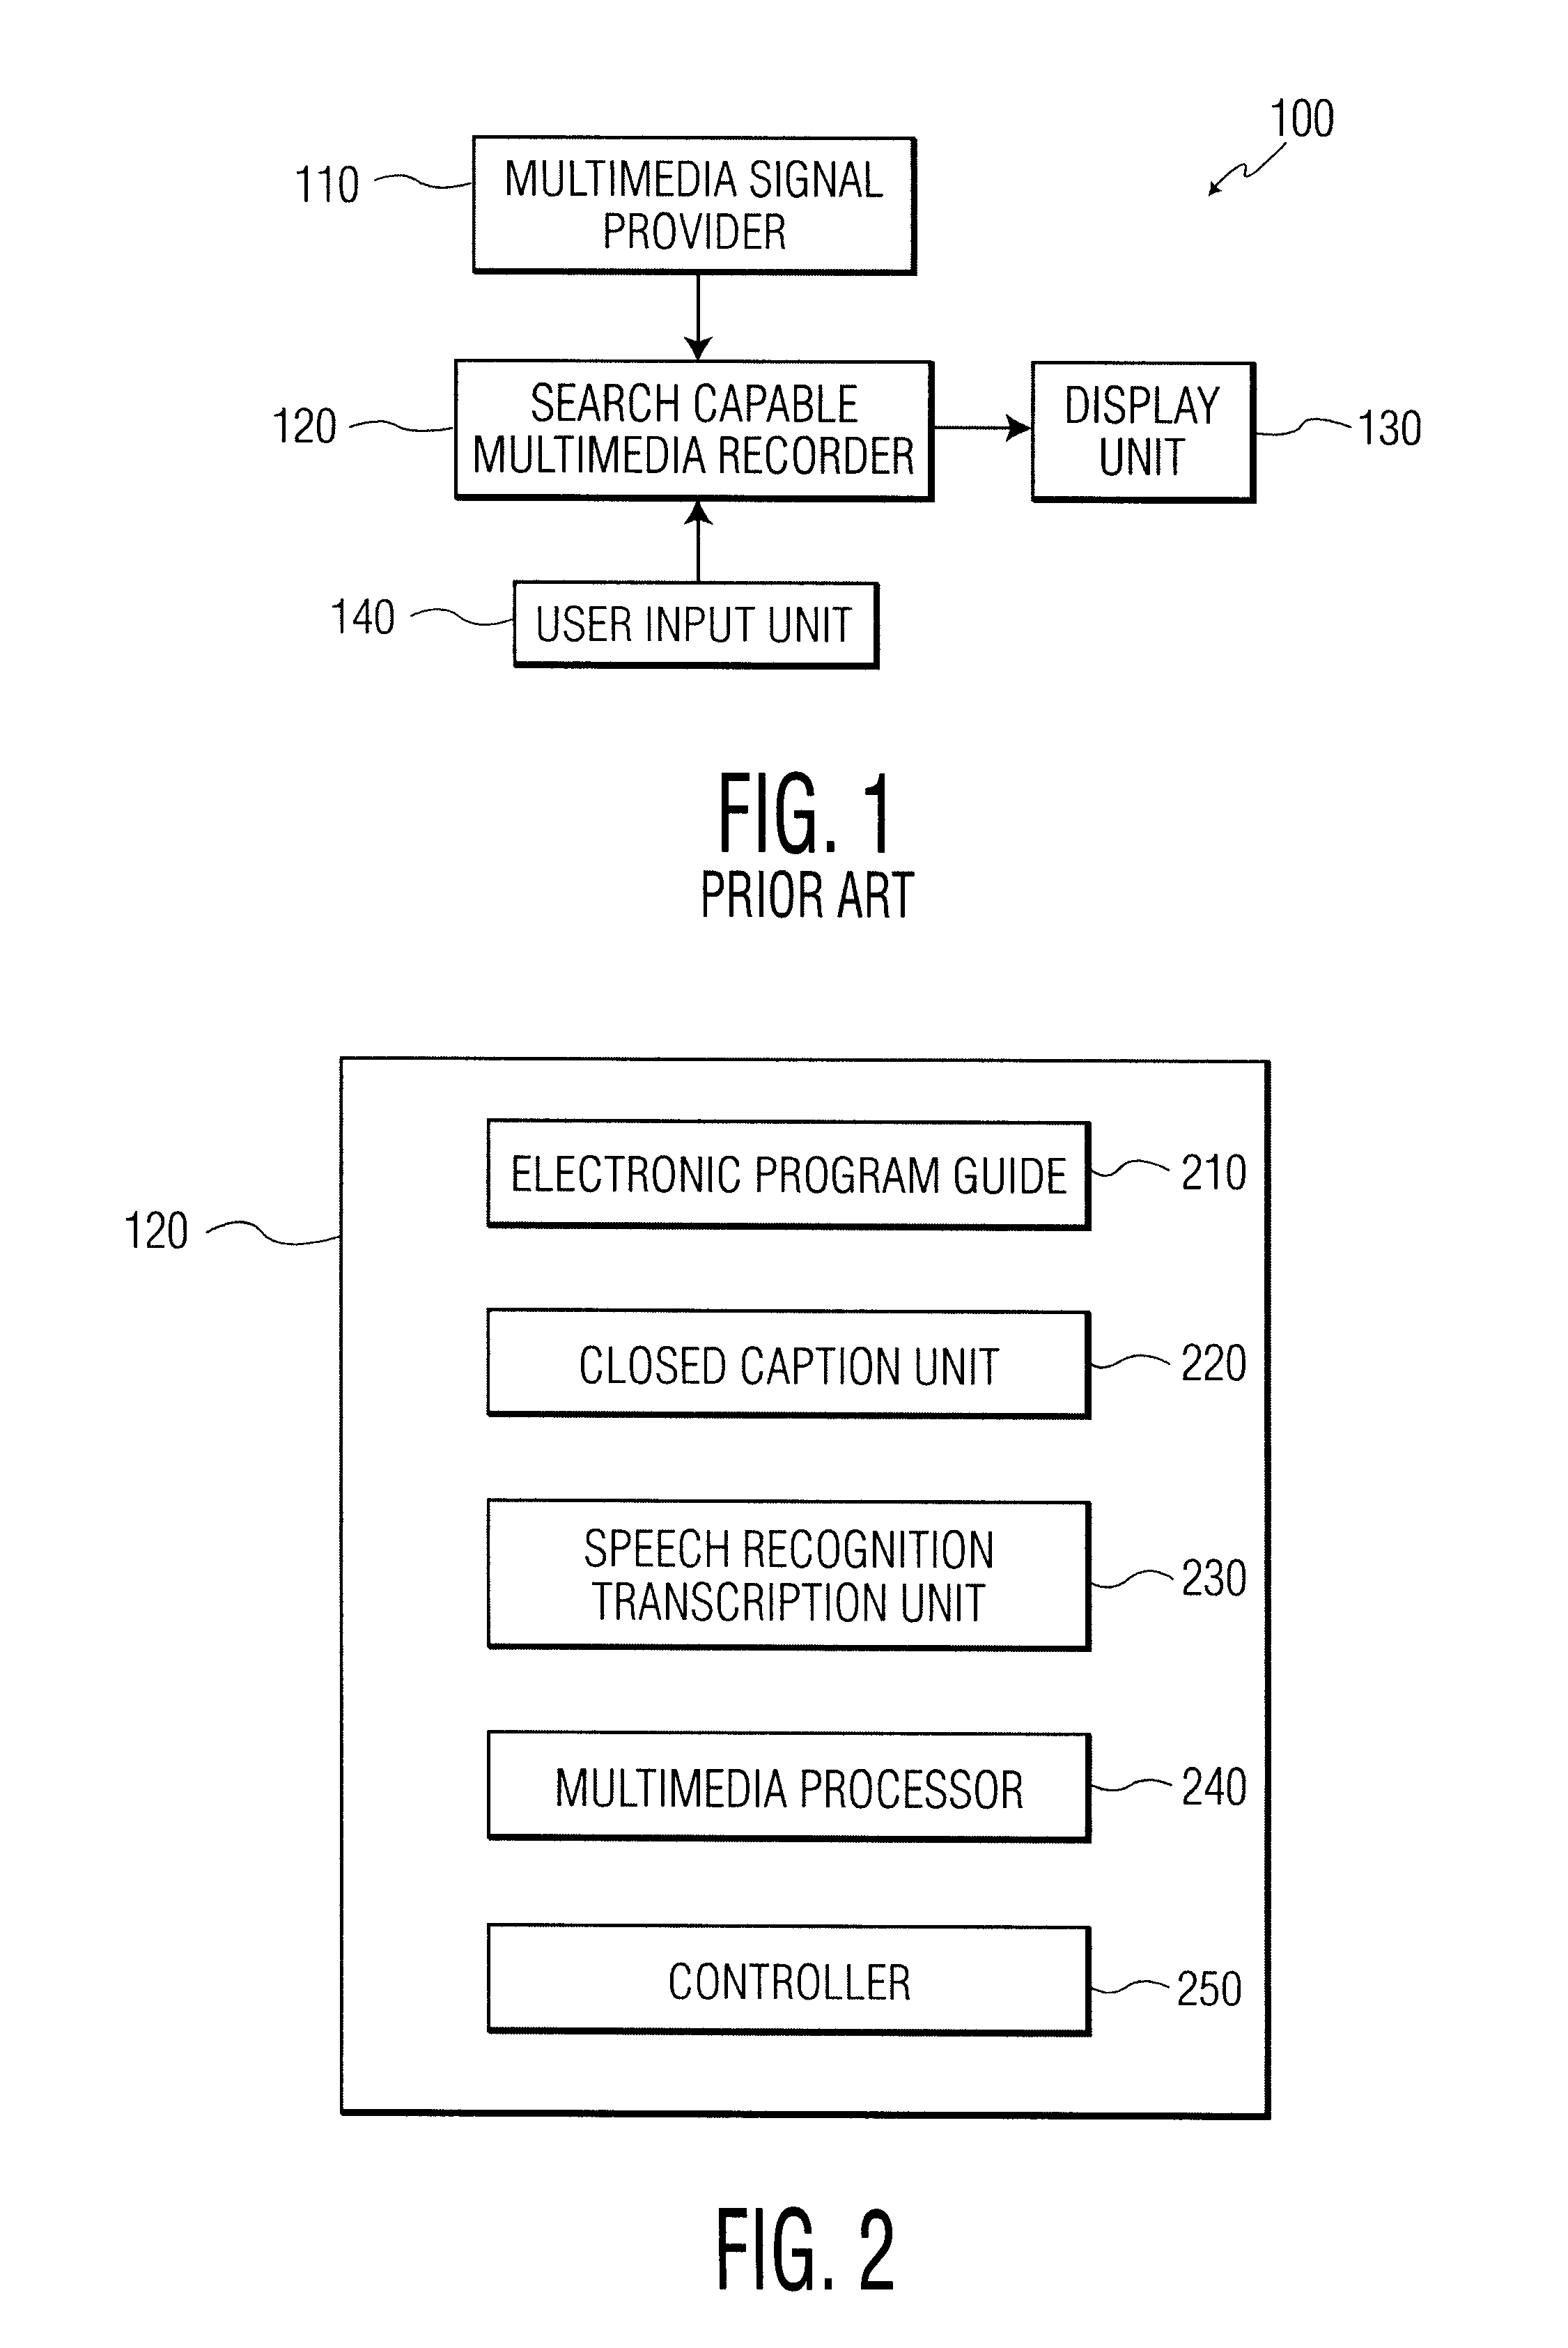 Apparatus and method for program selection utilizing exclusive and inclusive metadata searches